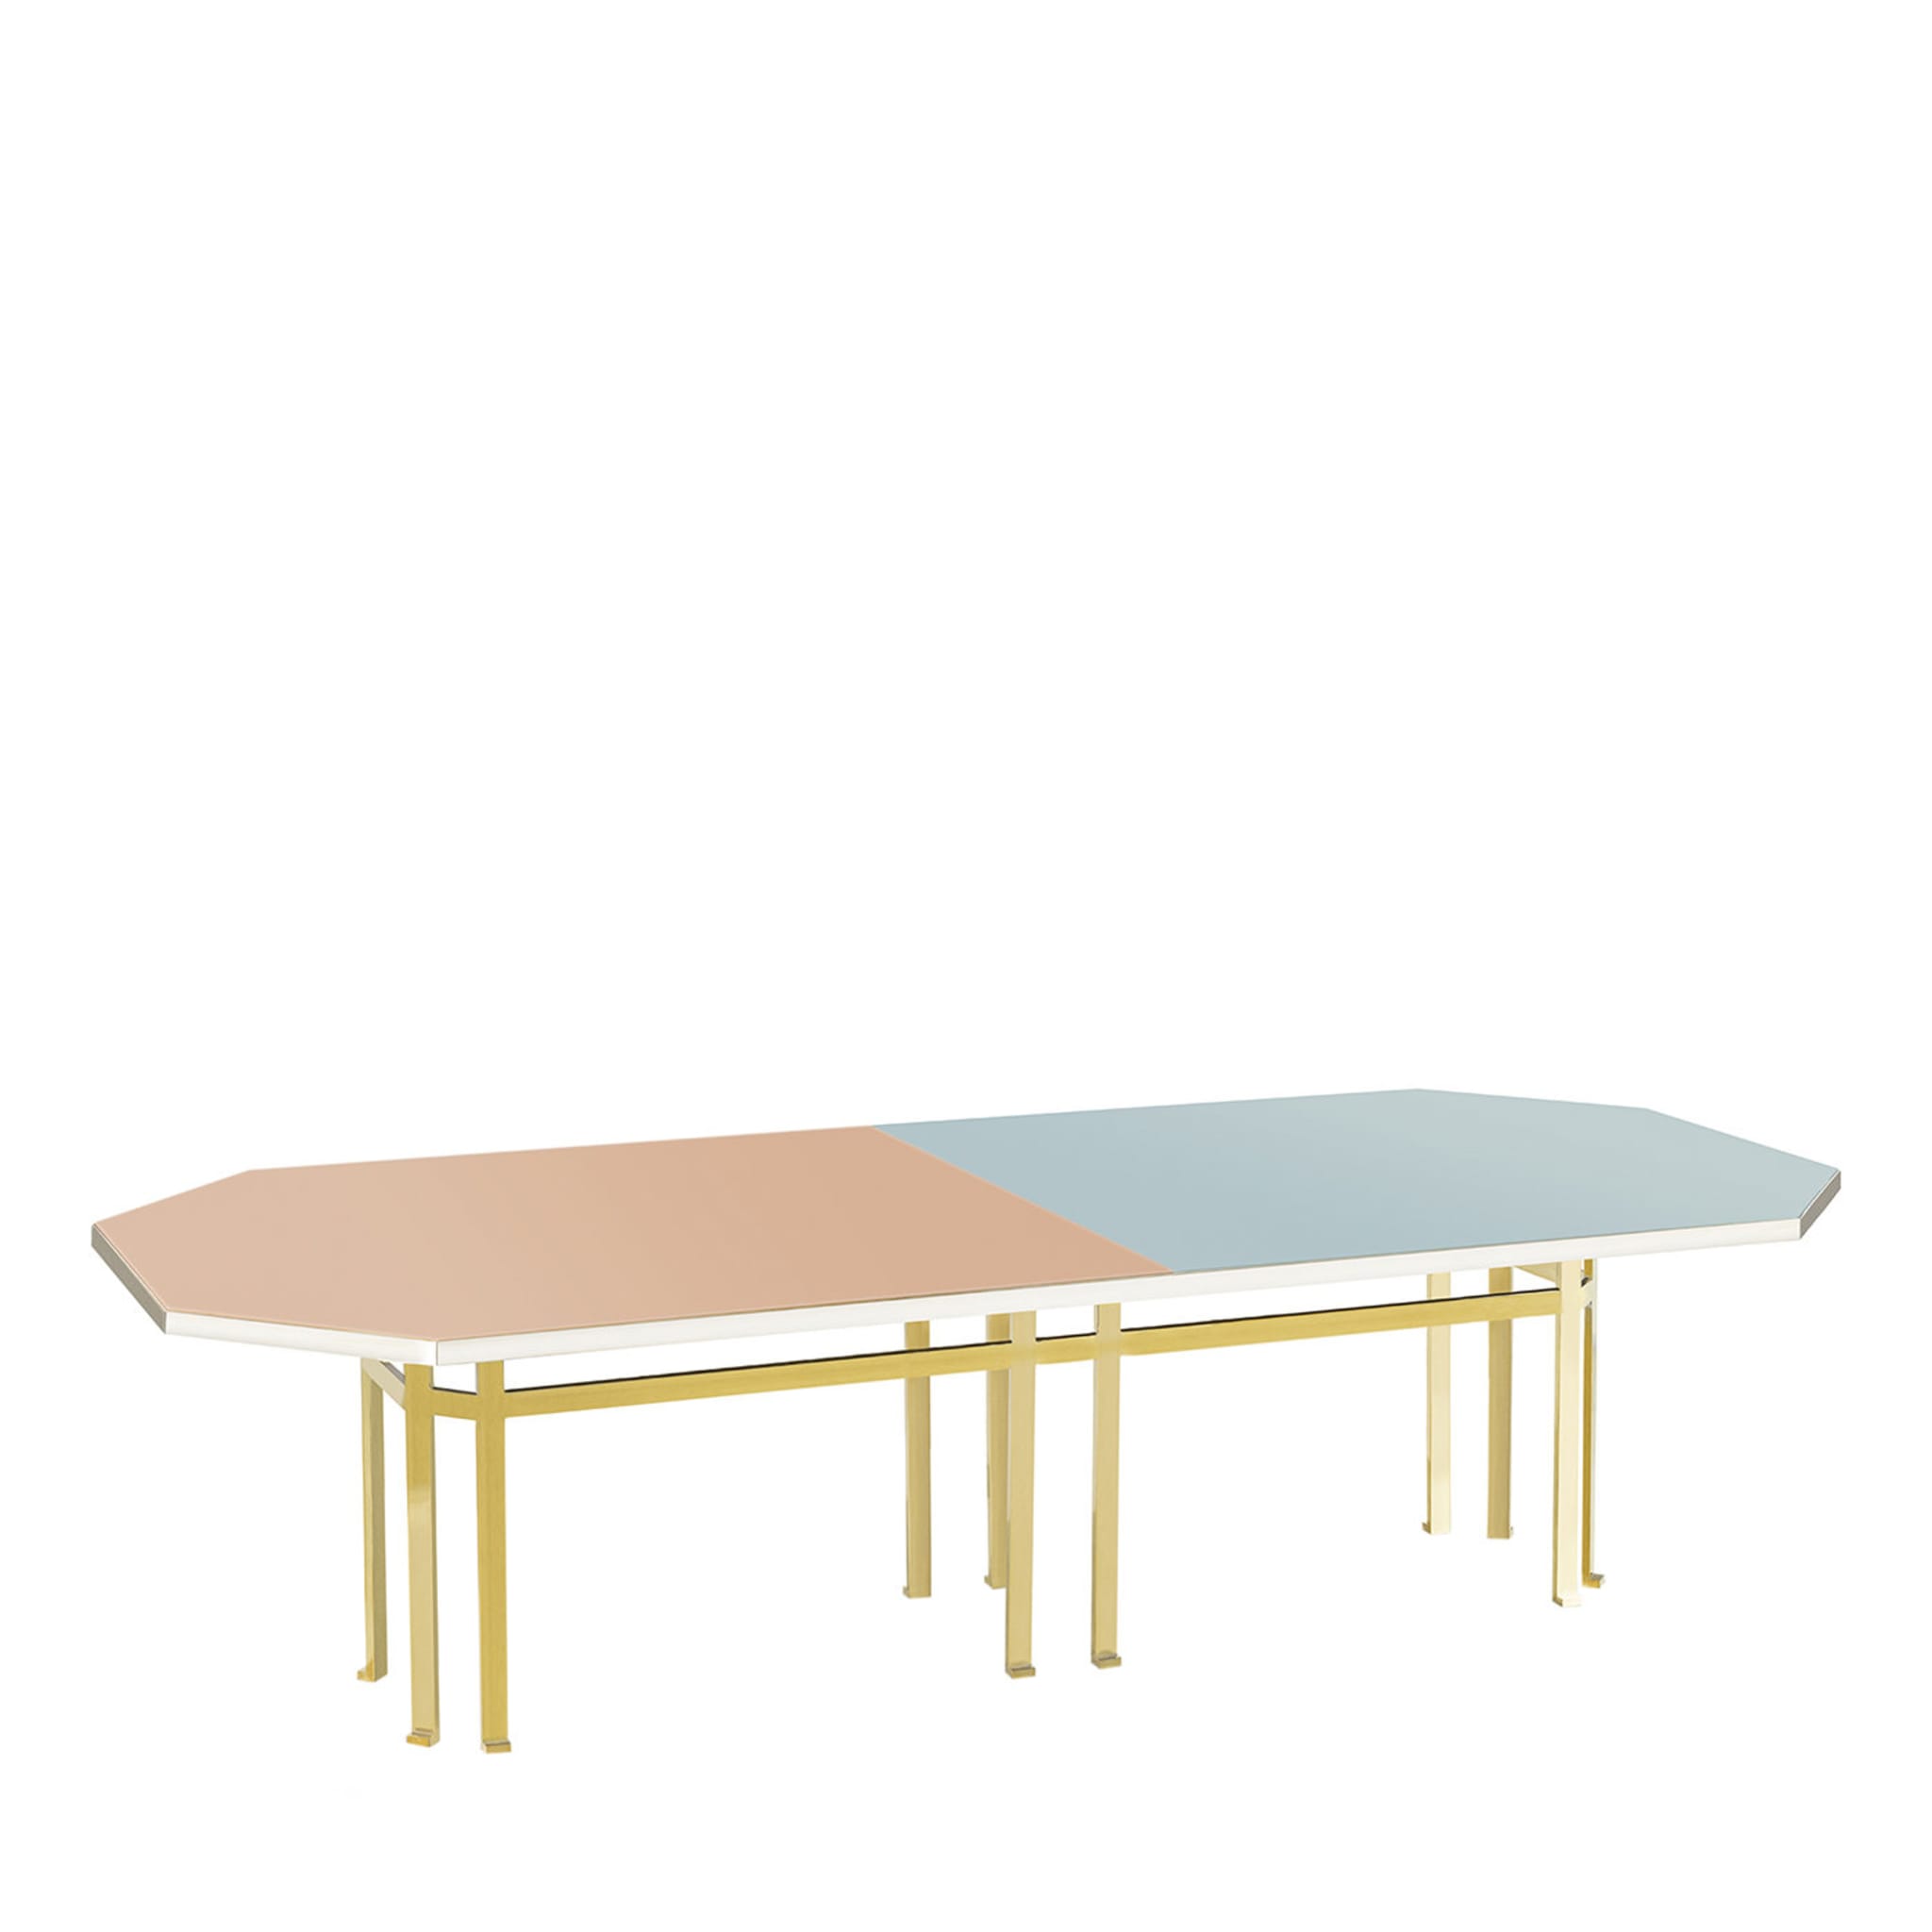 Holo Large Table by Filippo Feroldi - Main view